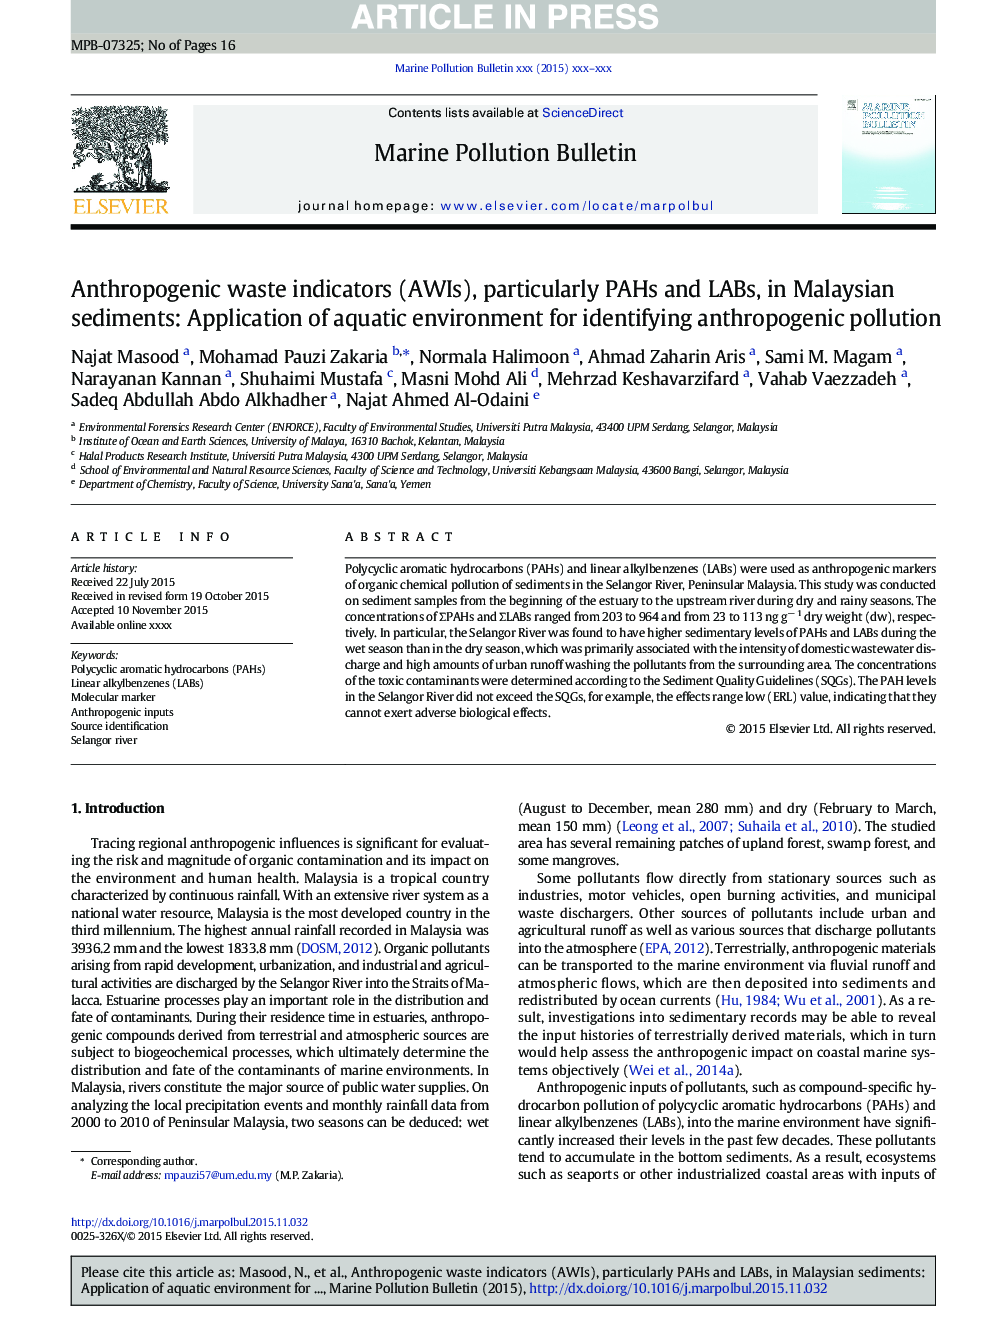 Anthropogenic waste indicators (AWIs), particularly PAHs and LABs, in Malaysian sediments: Application of aquatic environment for identifying anthropogenic pollution